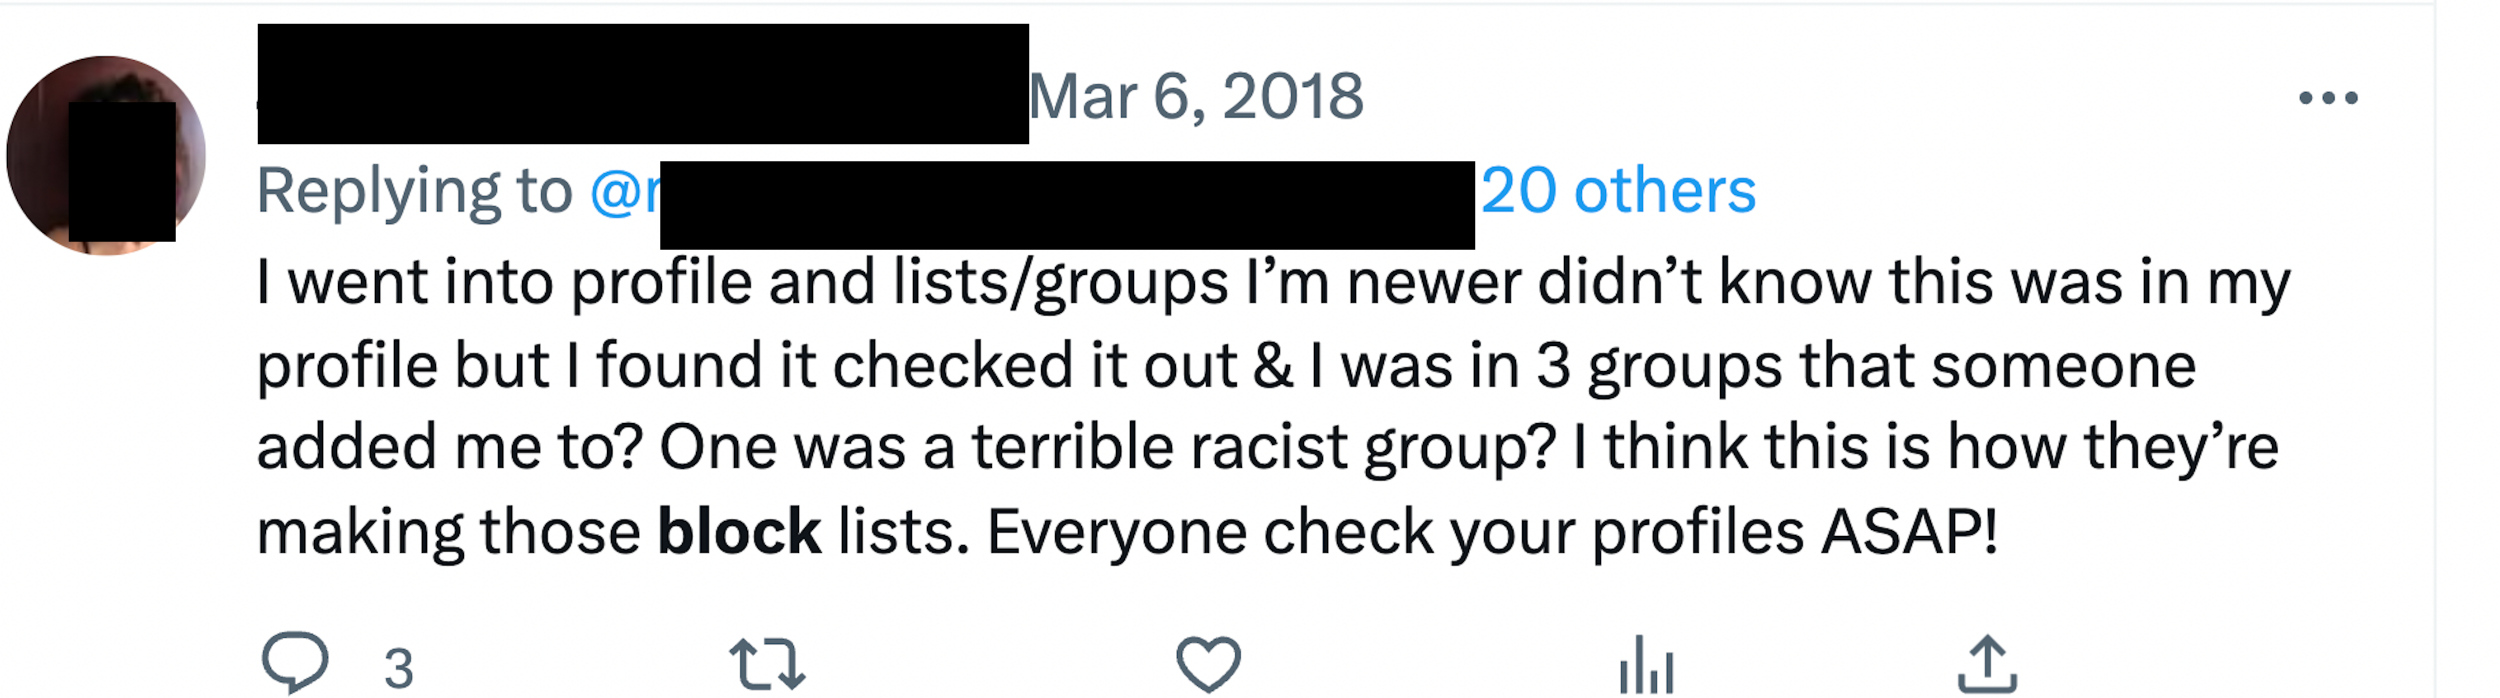 Twitter user expressing surprise at being on Woe’s blocklist: "I went into profile and lists/groups I'm newer didn't know this was in my profile but I found it checked it out and I was in 3 groups that someone added me to? One was a terrible racist group? I think this is how they're making those block lists. Everyone check your profiles ASAP!